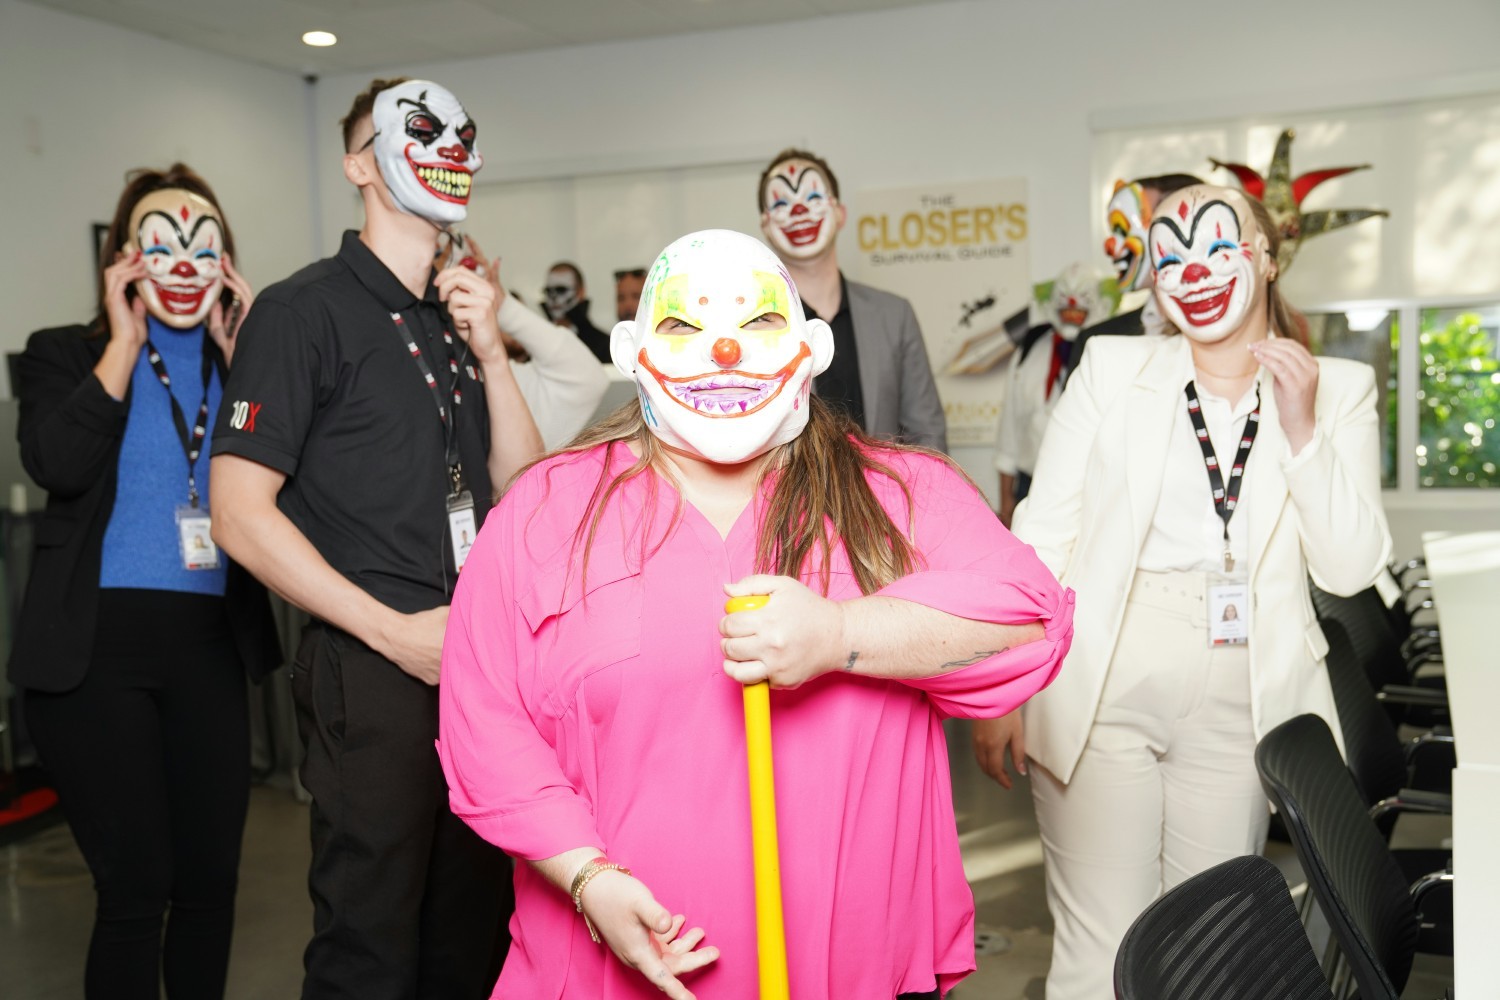 Staff takes part in fun team-building activities such as costume contests.